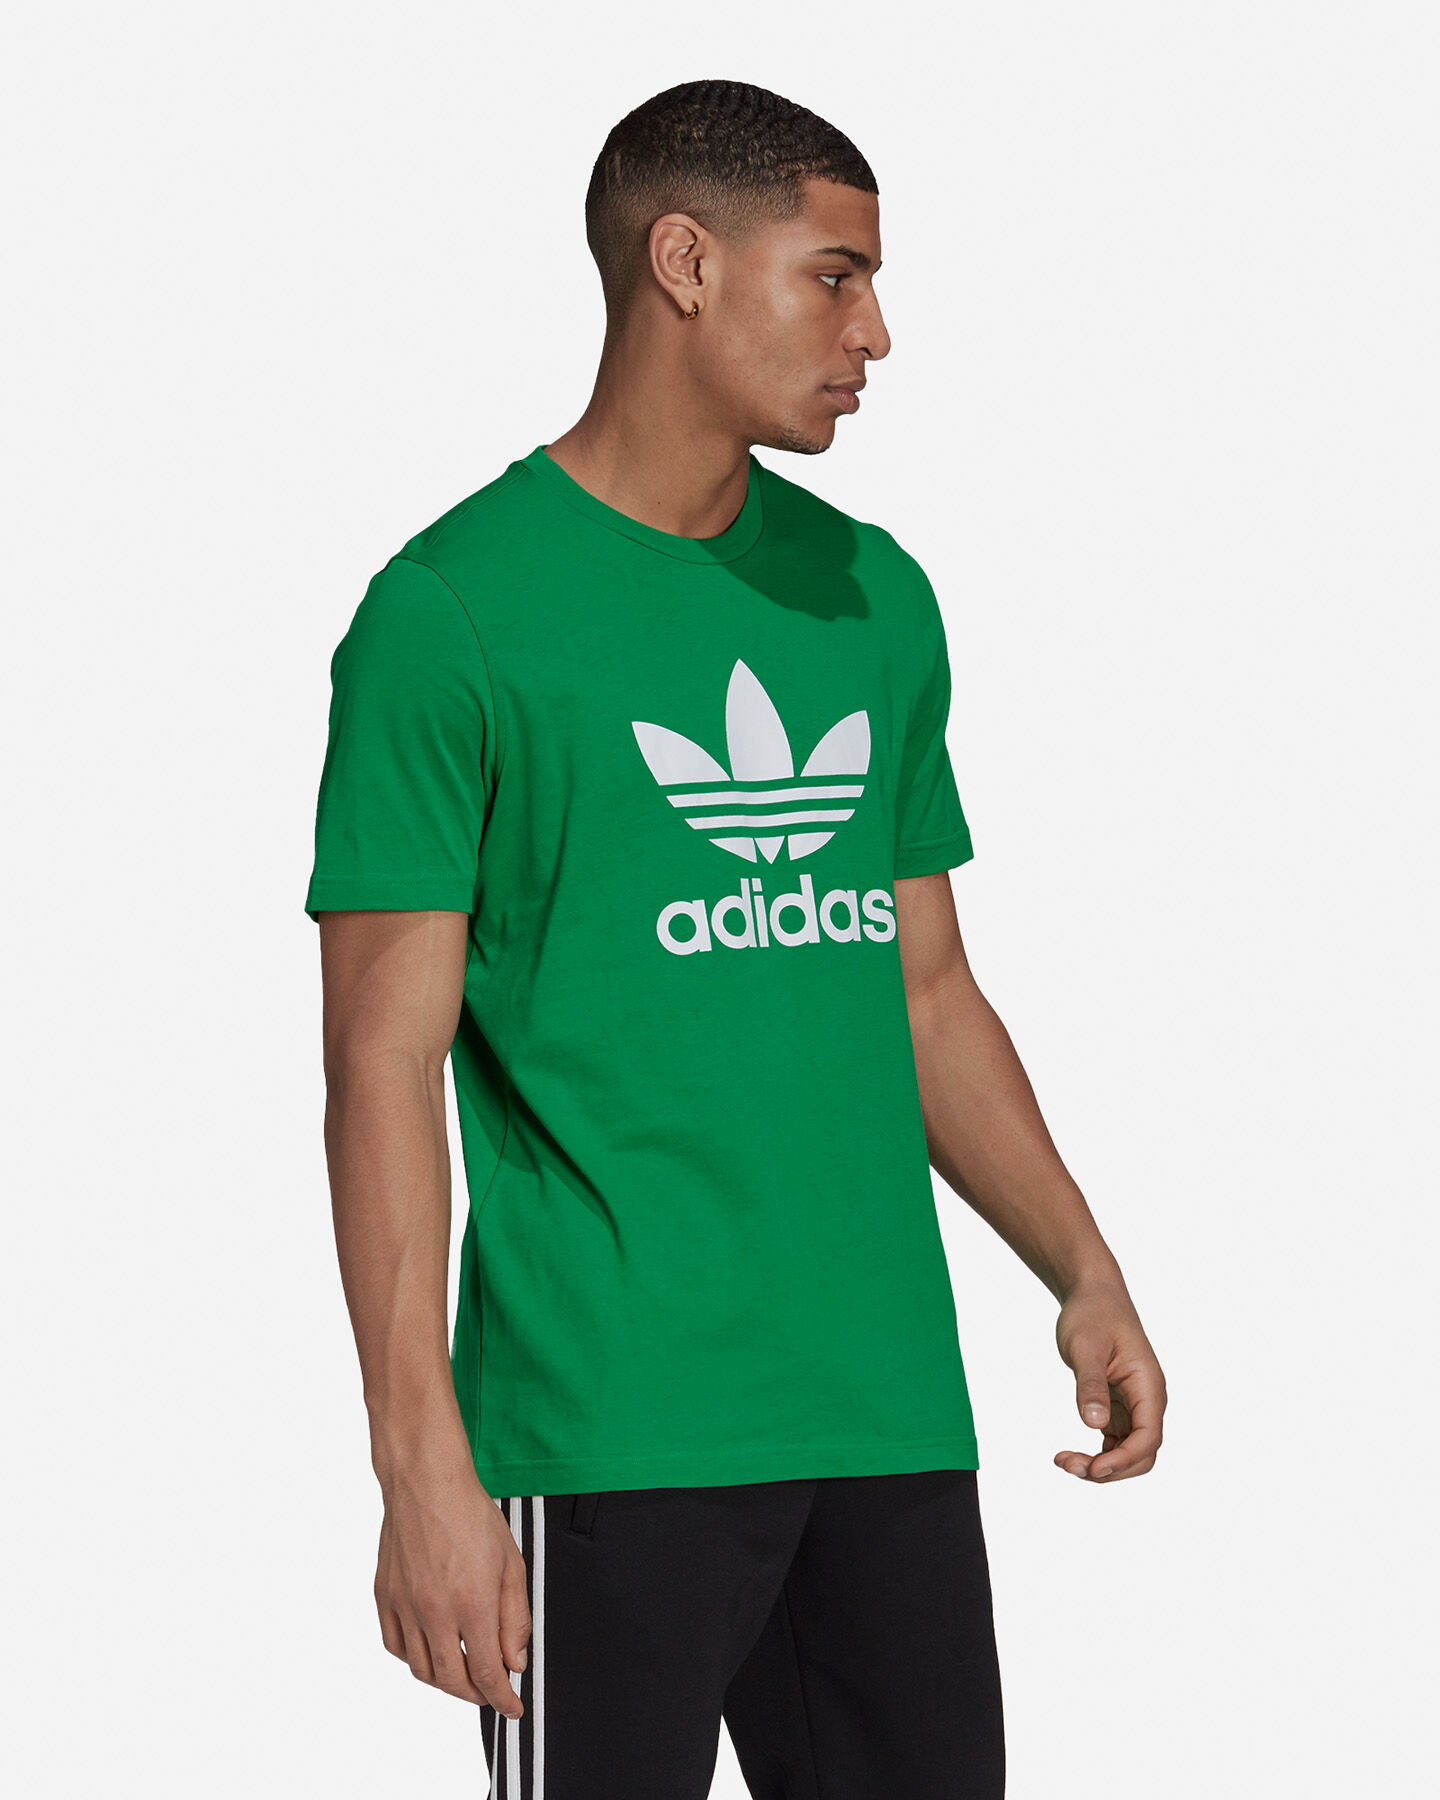  T-Shirt ADIDAS TREFOIL M S5324118 scatto 2